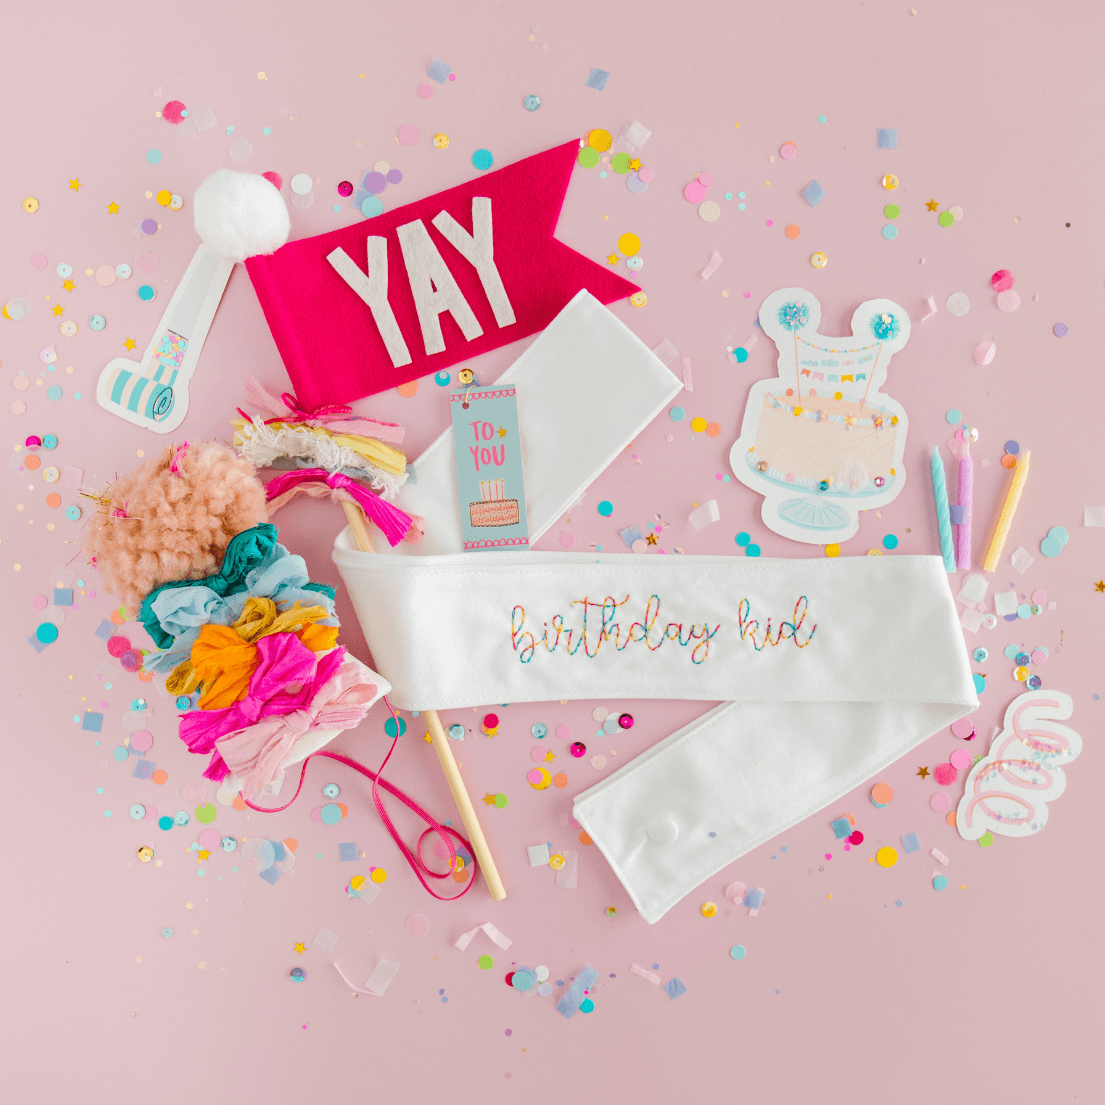 white fabric birthday sash for kids from madly wish on etsy